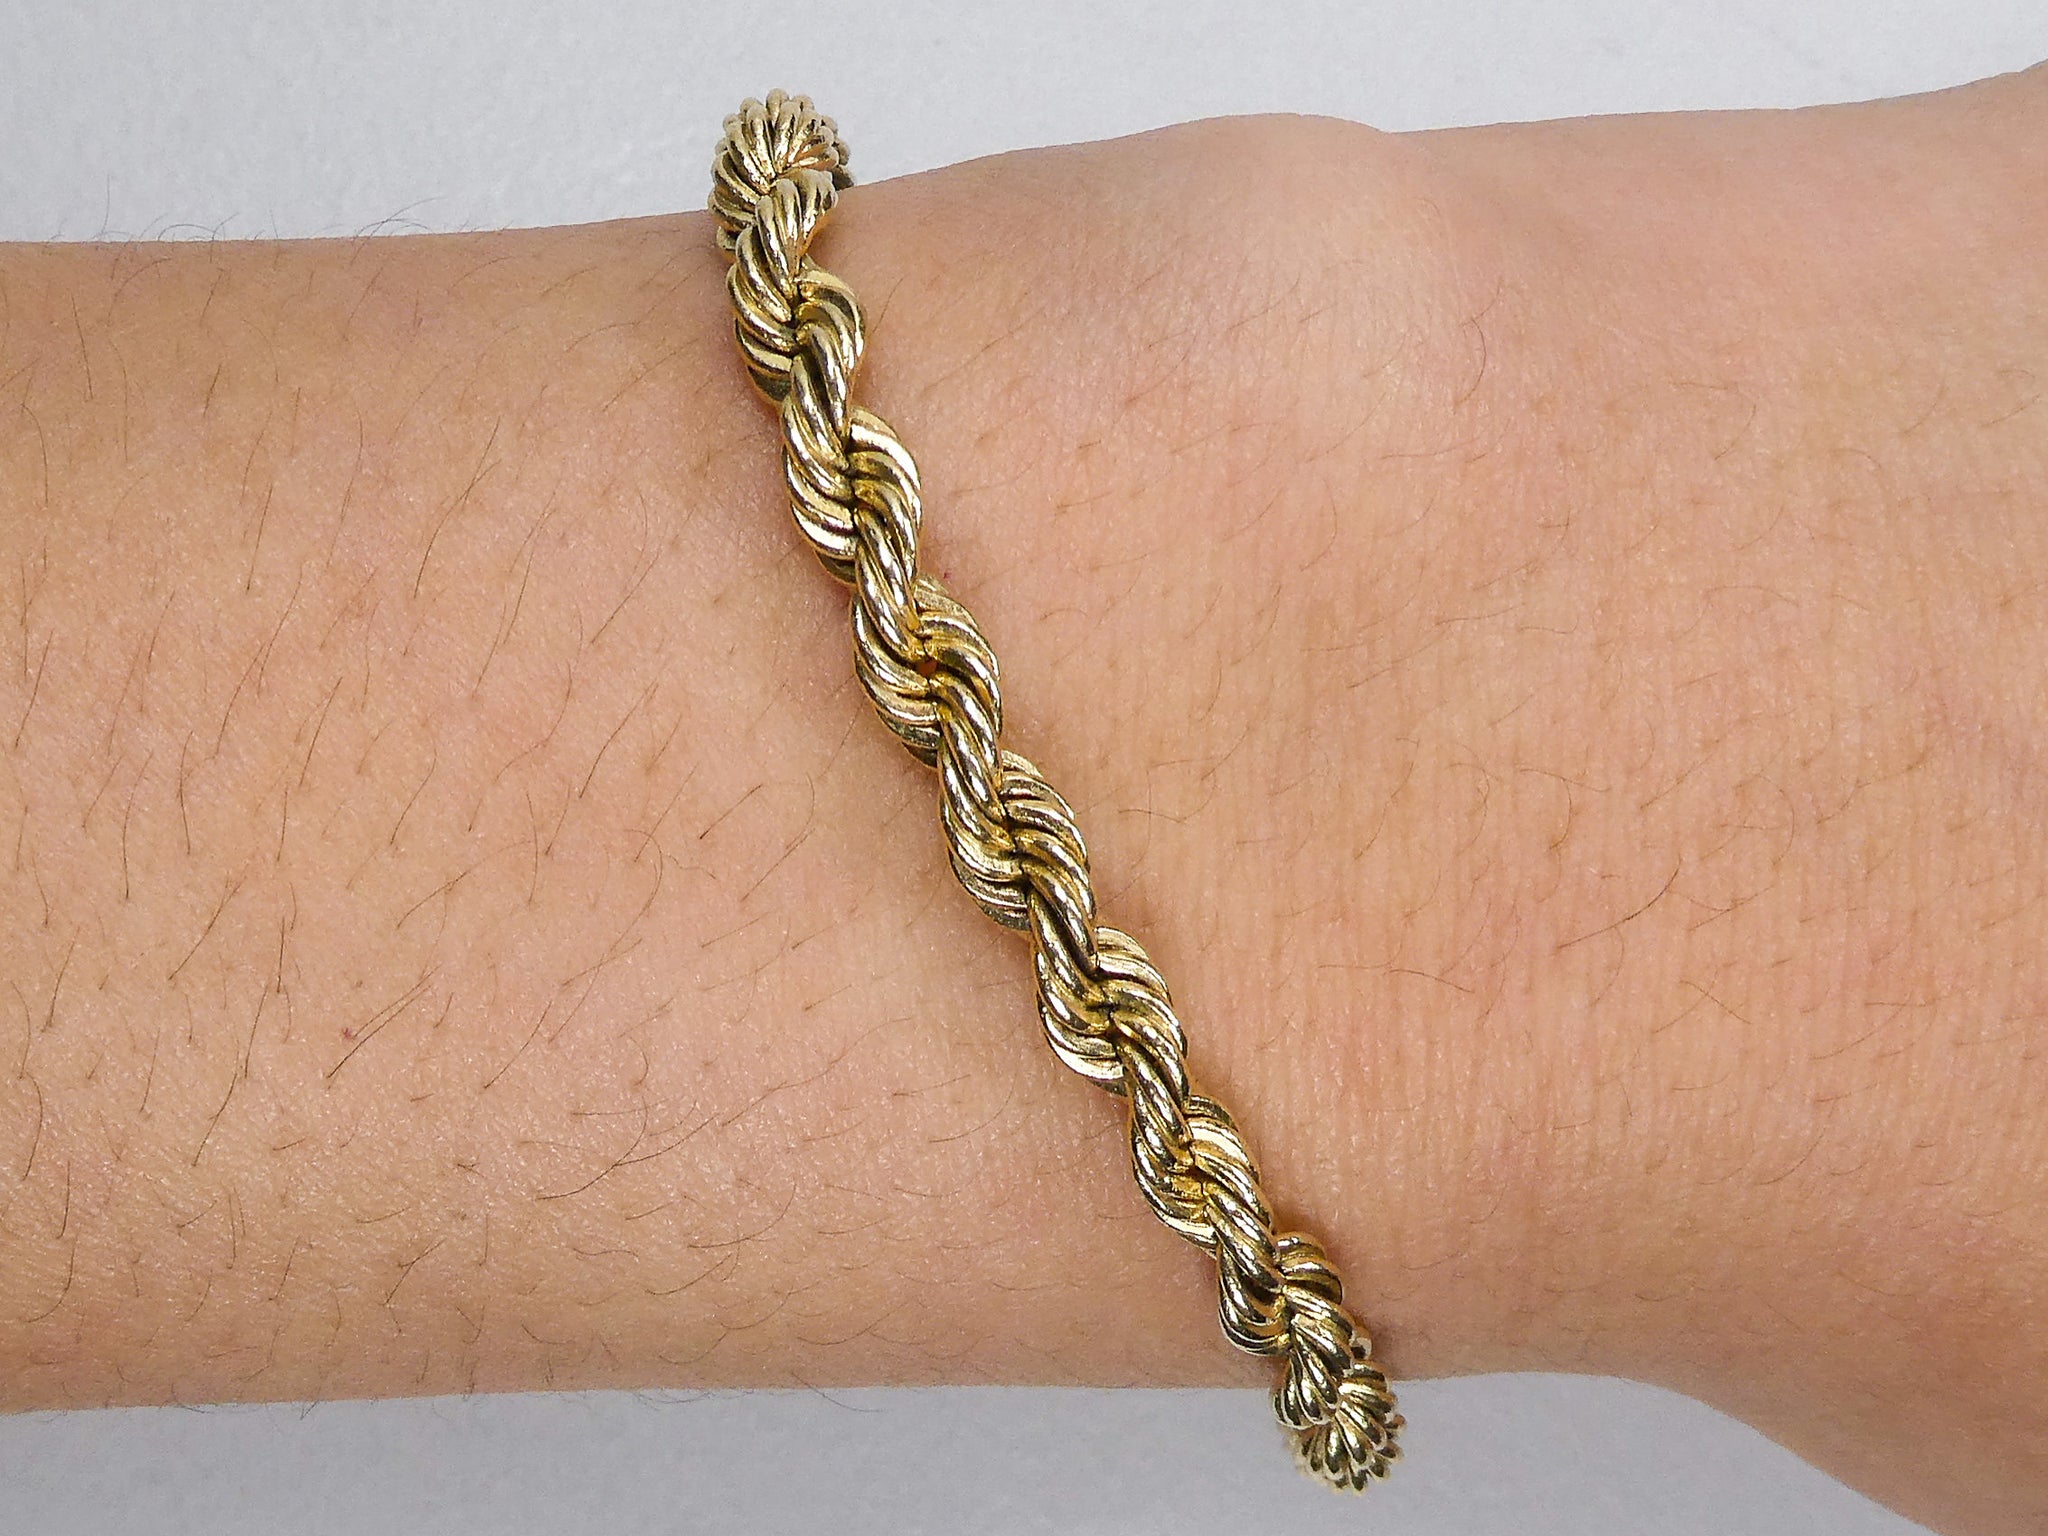 4.75 mm Wide Solid Rope Chain Bracelet in 14K Yellow Gold at 7"